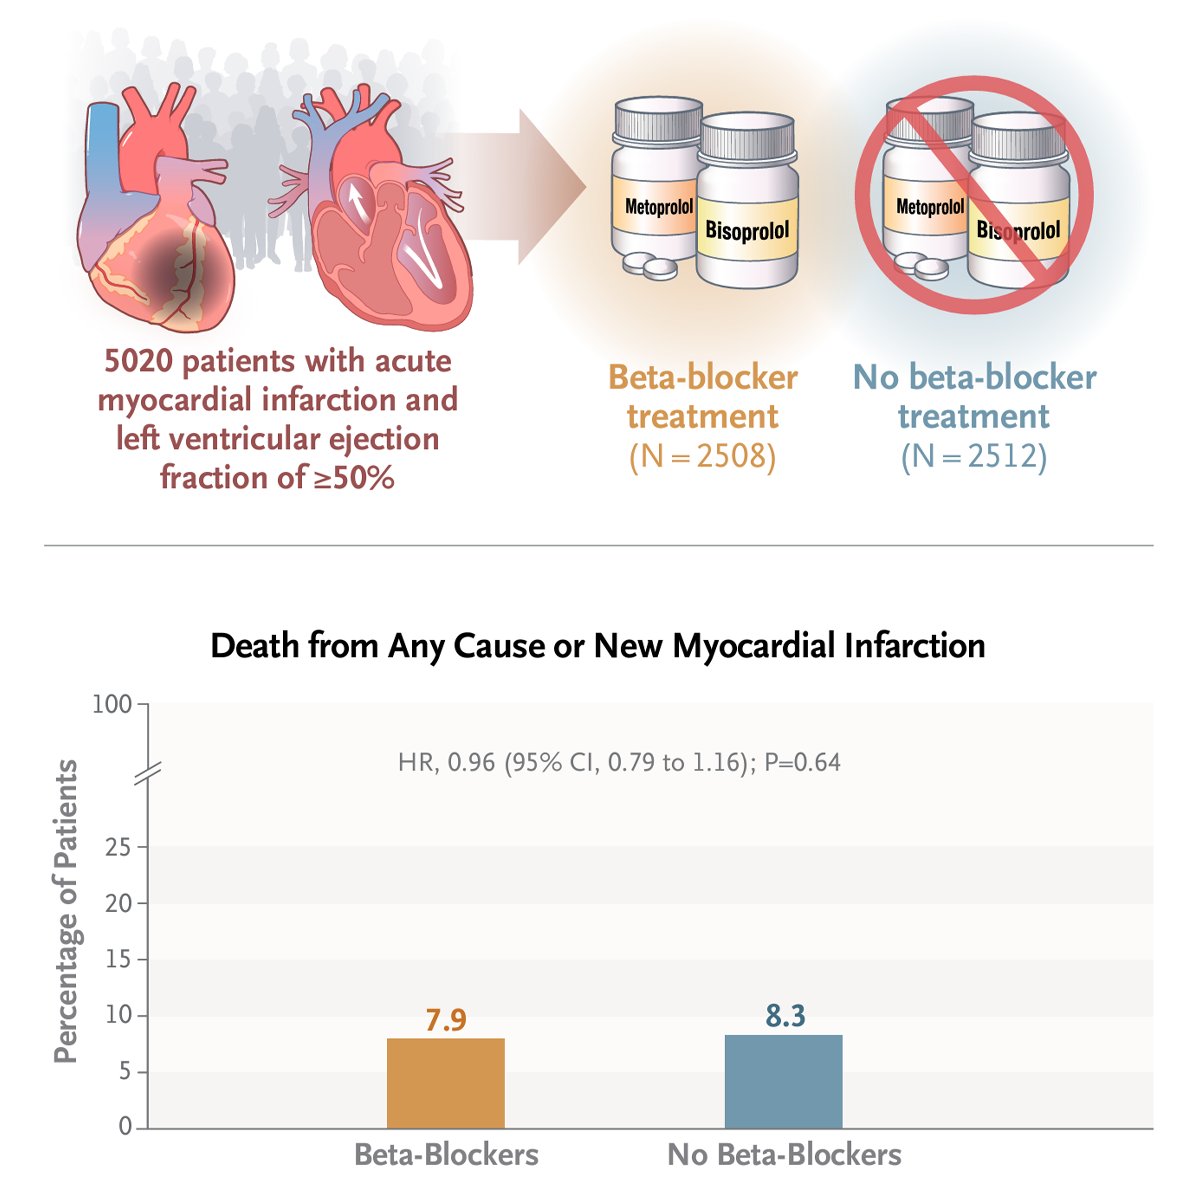 REDUCE-AMI trial: Among patients with an acute myocardial infarction and preserved ejection fraction, long-term treatment with beta-blockers did not lead to a lower risk of death or myocardial infarction than no beta-blocker treatment. Full trial results: nej.md/4akVhRx